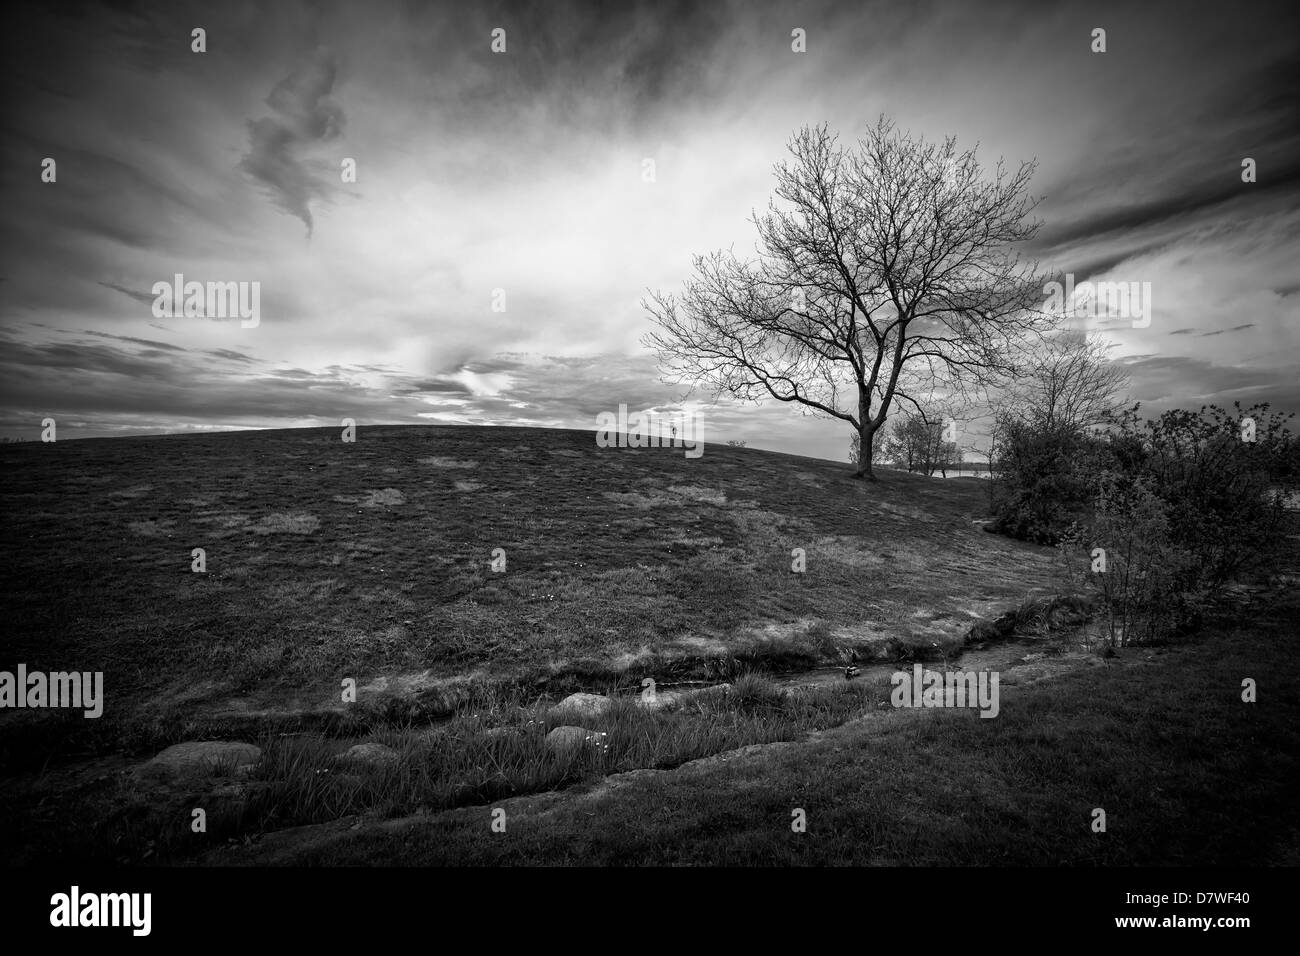 Dramatic landscape image of an ominous sky behind a small hill with a single, leafless tree, shot in black and white. Stock Photo